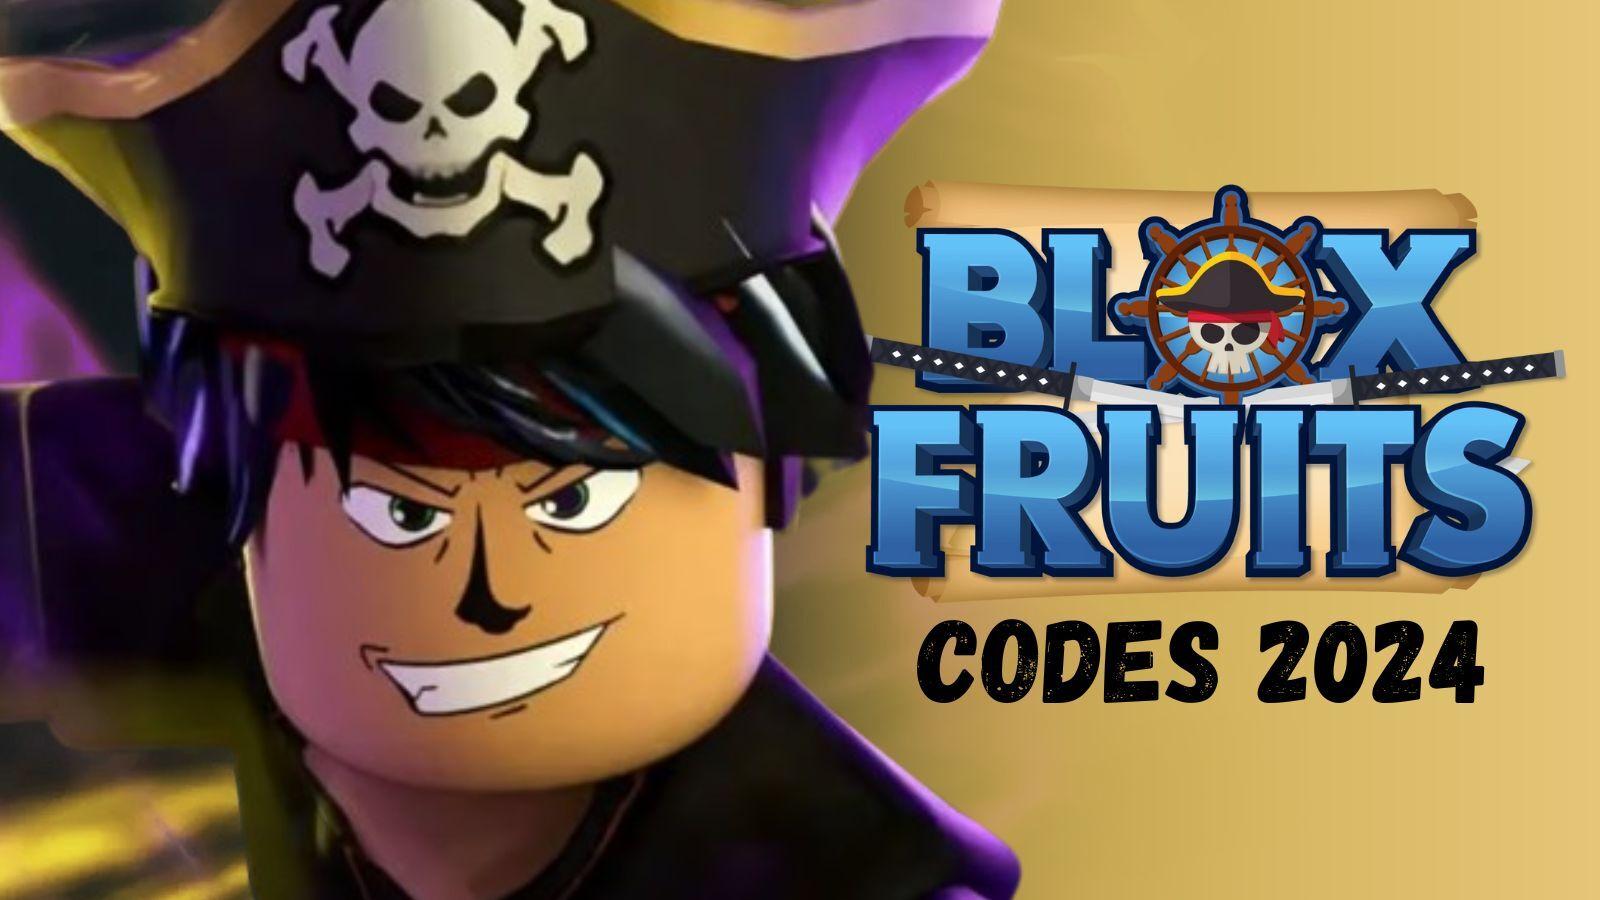 Blox Fruits codes for 2024